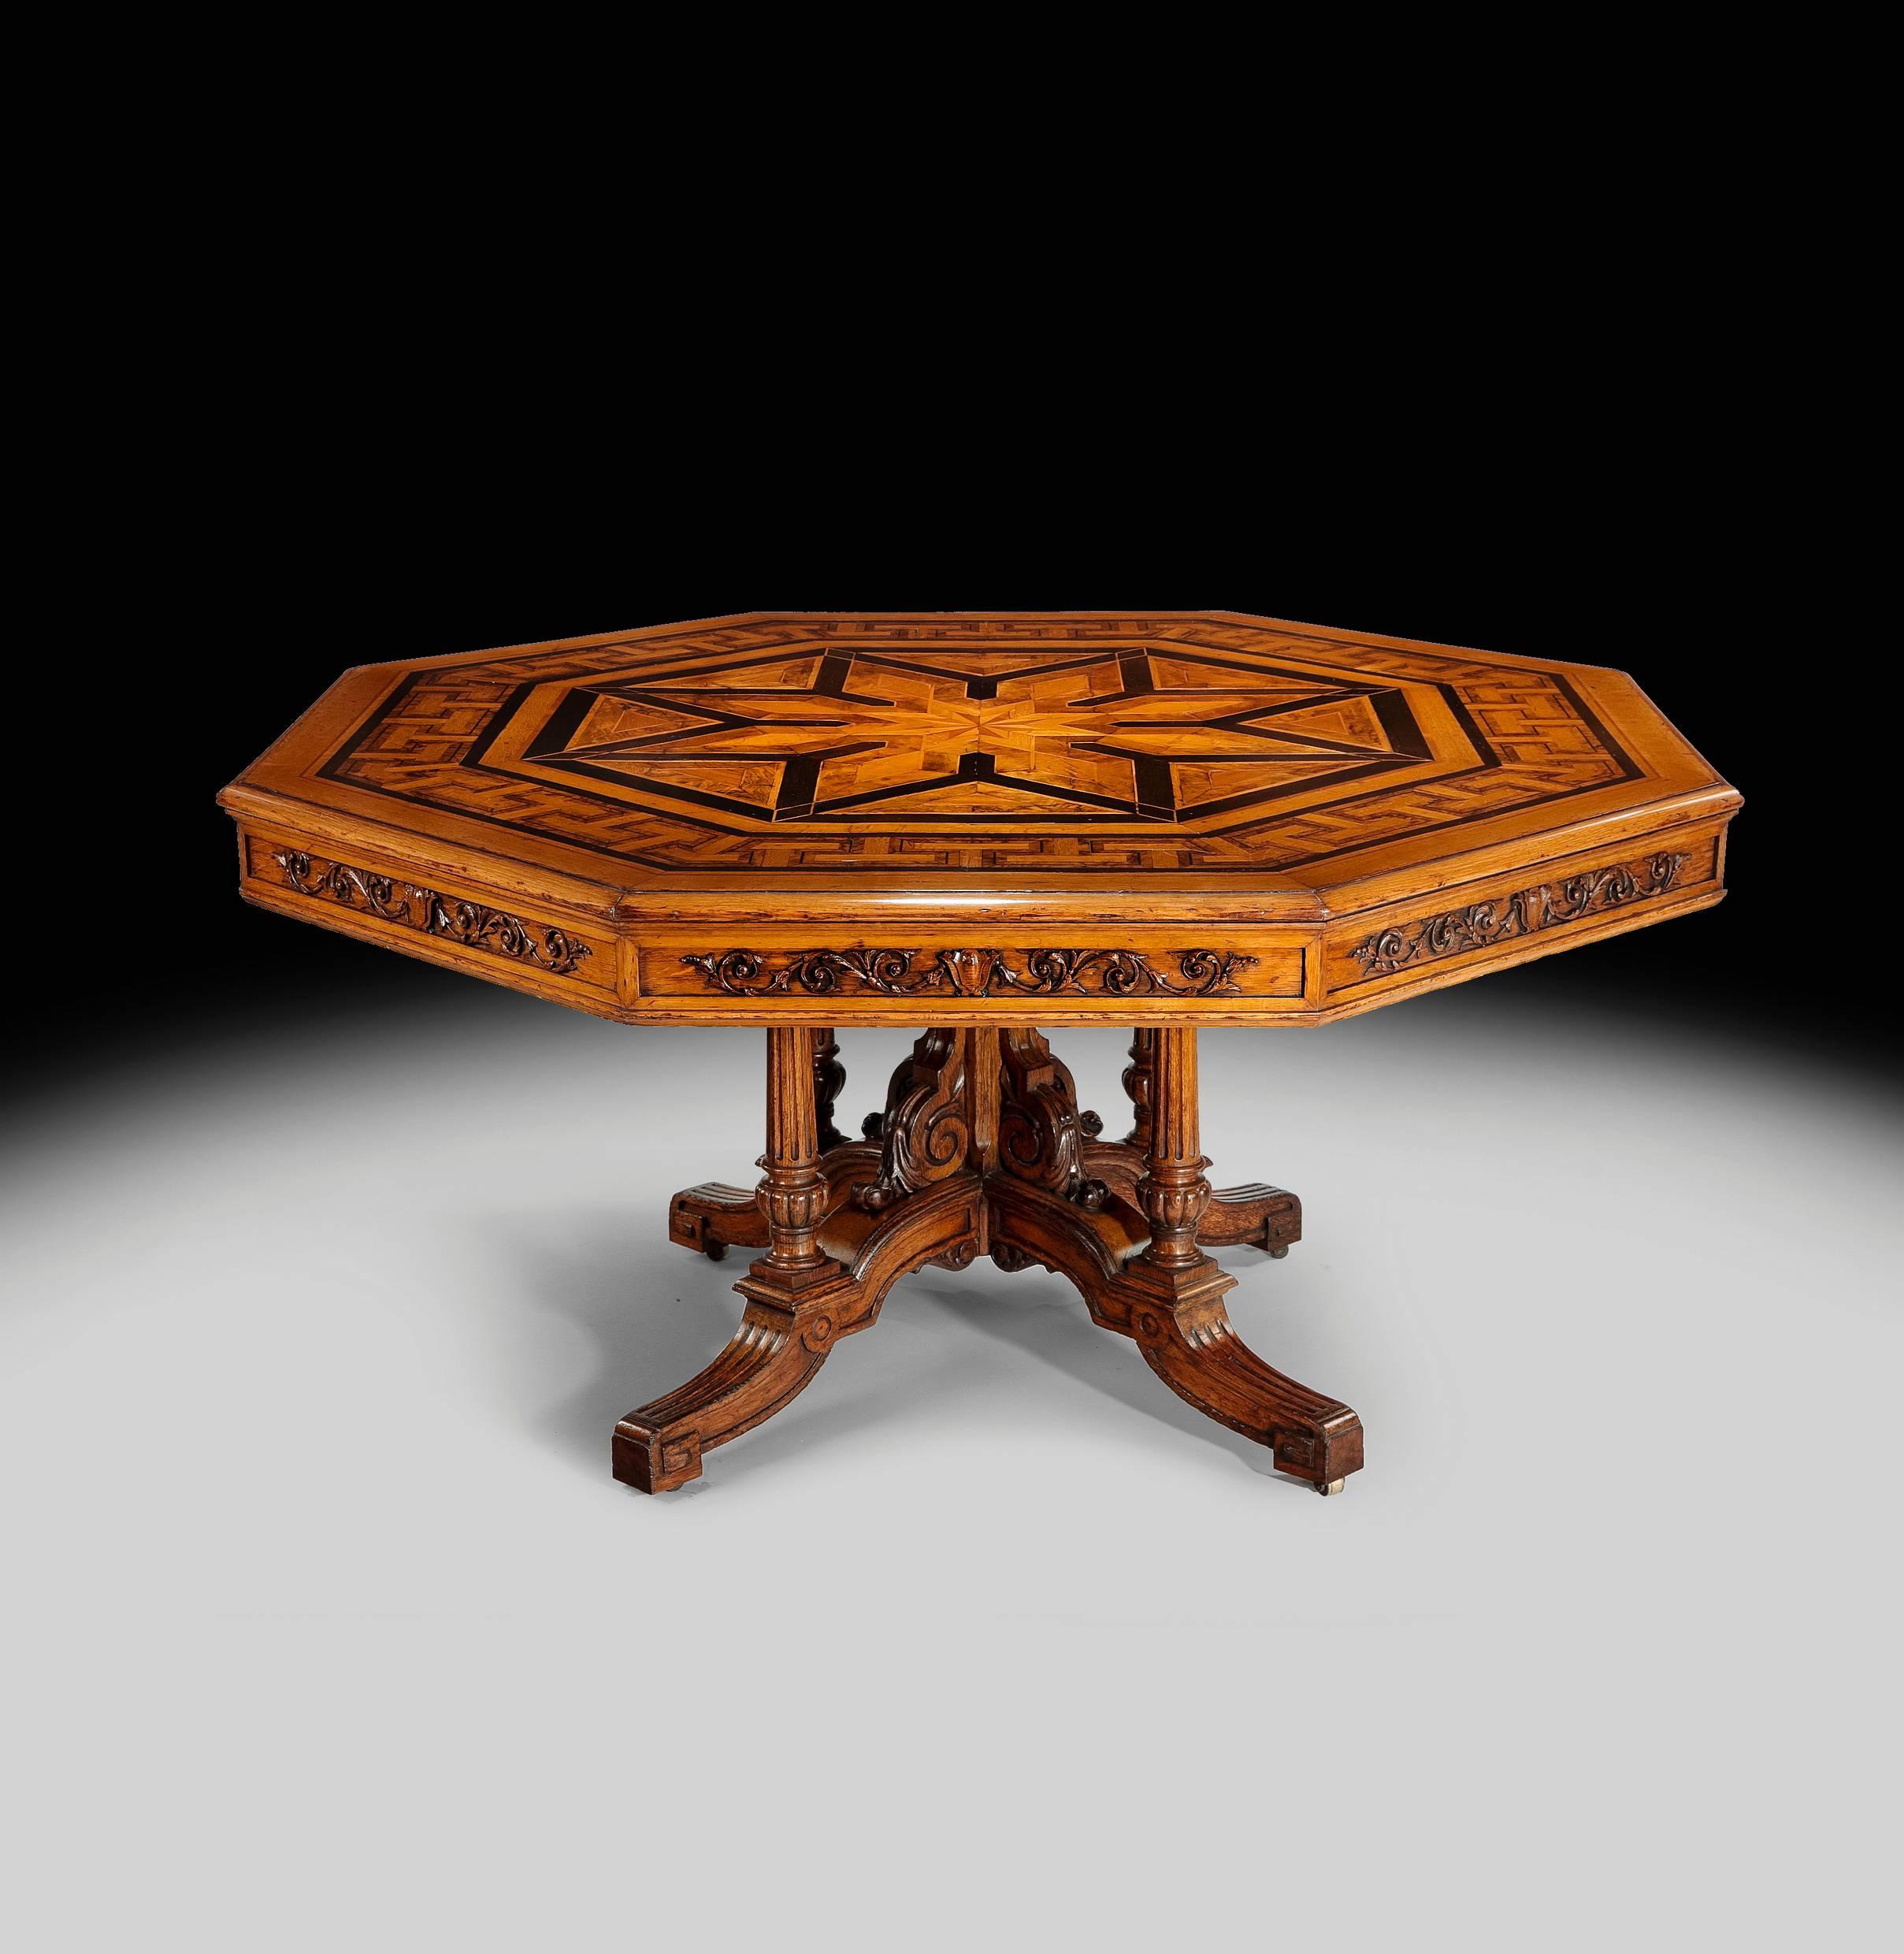 This unique table dating from the mid-19th century is absolutely superb. It is made from oak and has a top that is parquetry inlaid with oak, walnut, stained pear wood and box wood. The frieze has two long pull out drawers and the whole apron is